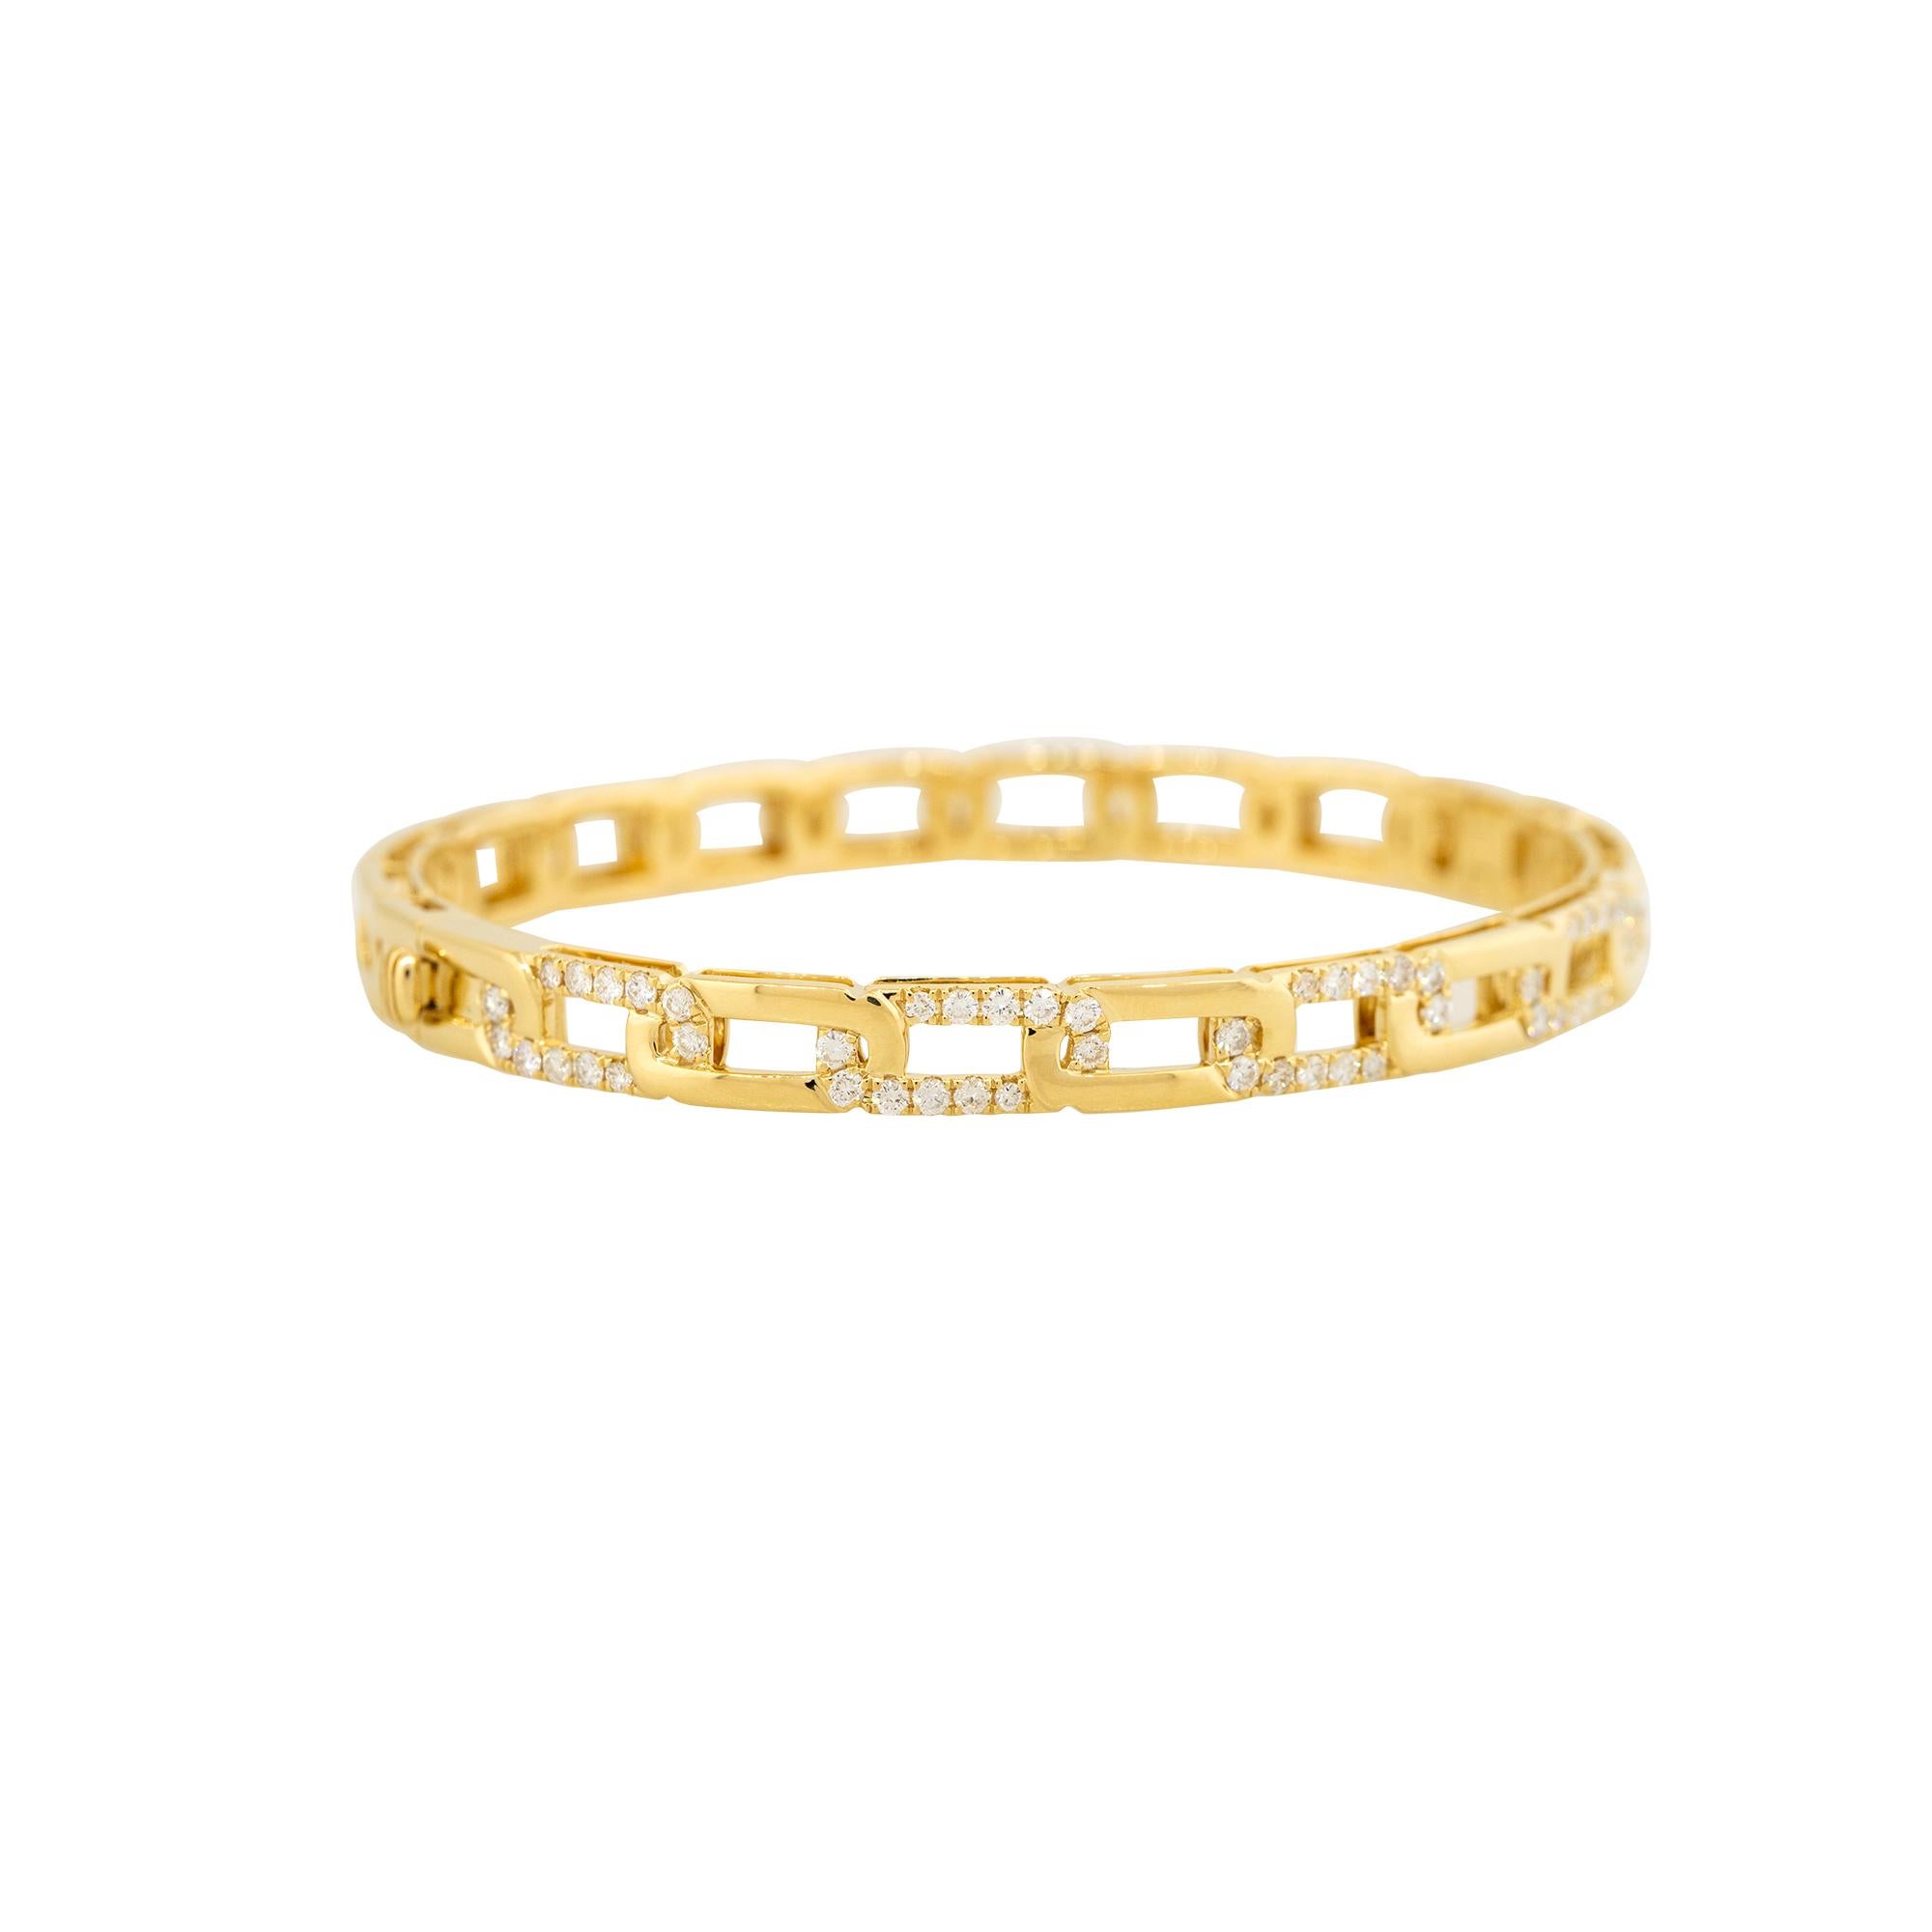 18k Yellow Gold 1.05ctw Pave Diamond Interlocking Link-Style Bangle Bracelet
Material: 18k Yellow Gold
Diamond Details: There are approximately 1.05 carats of natural, round brilliant-cut diamonds
Diamond Clarity: All diamonds are approximately